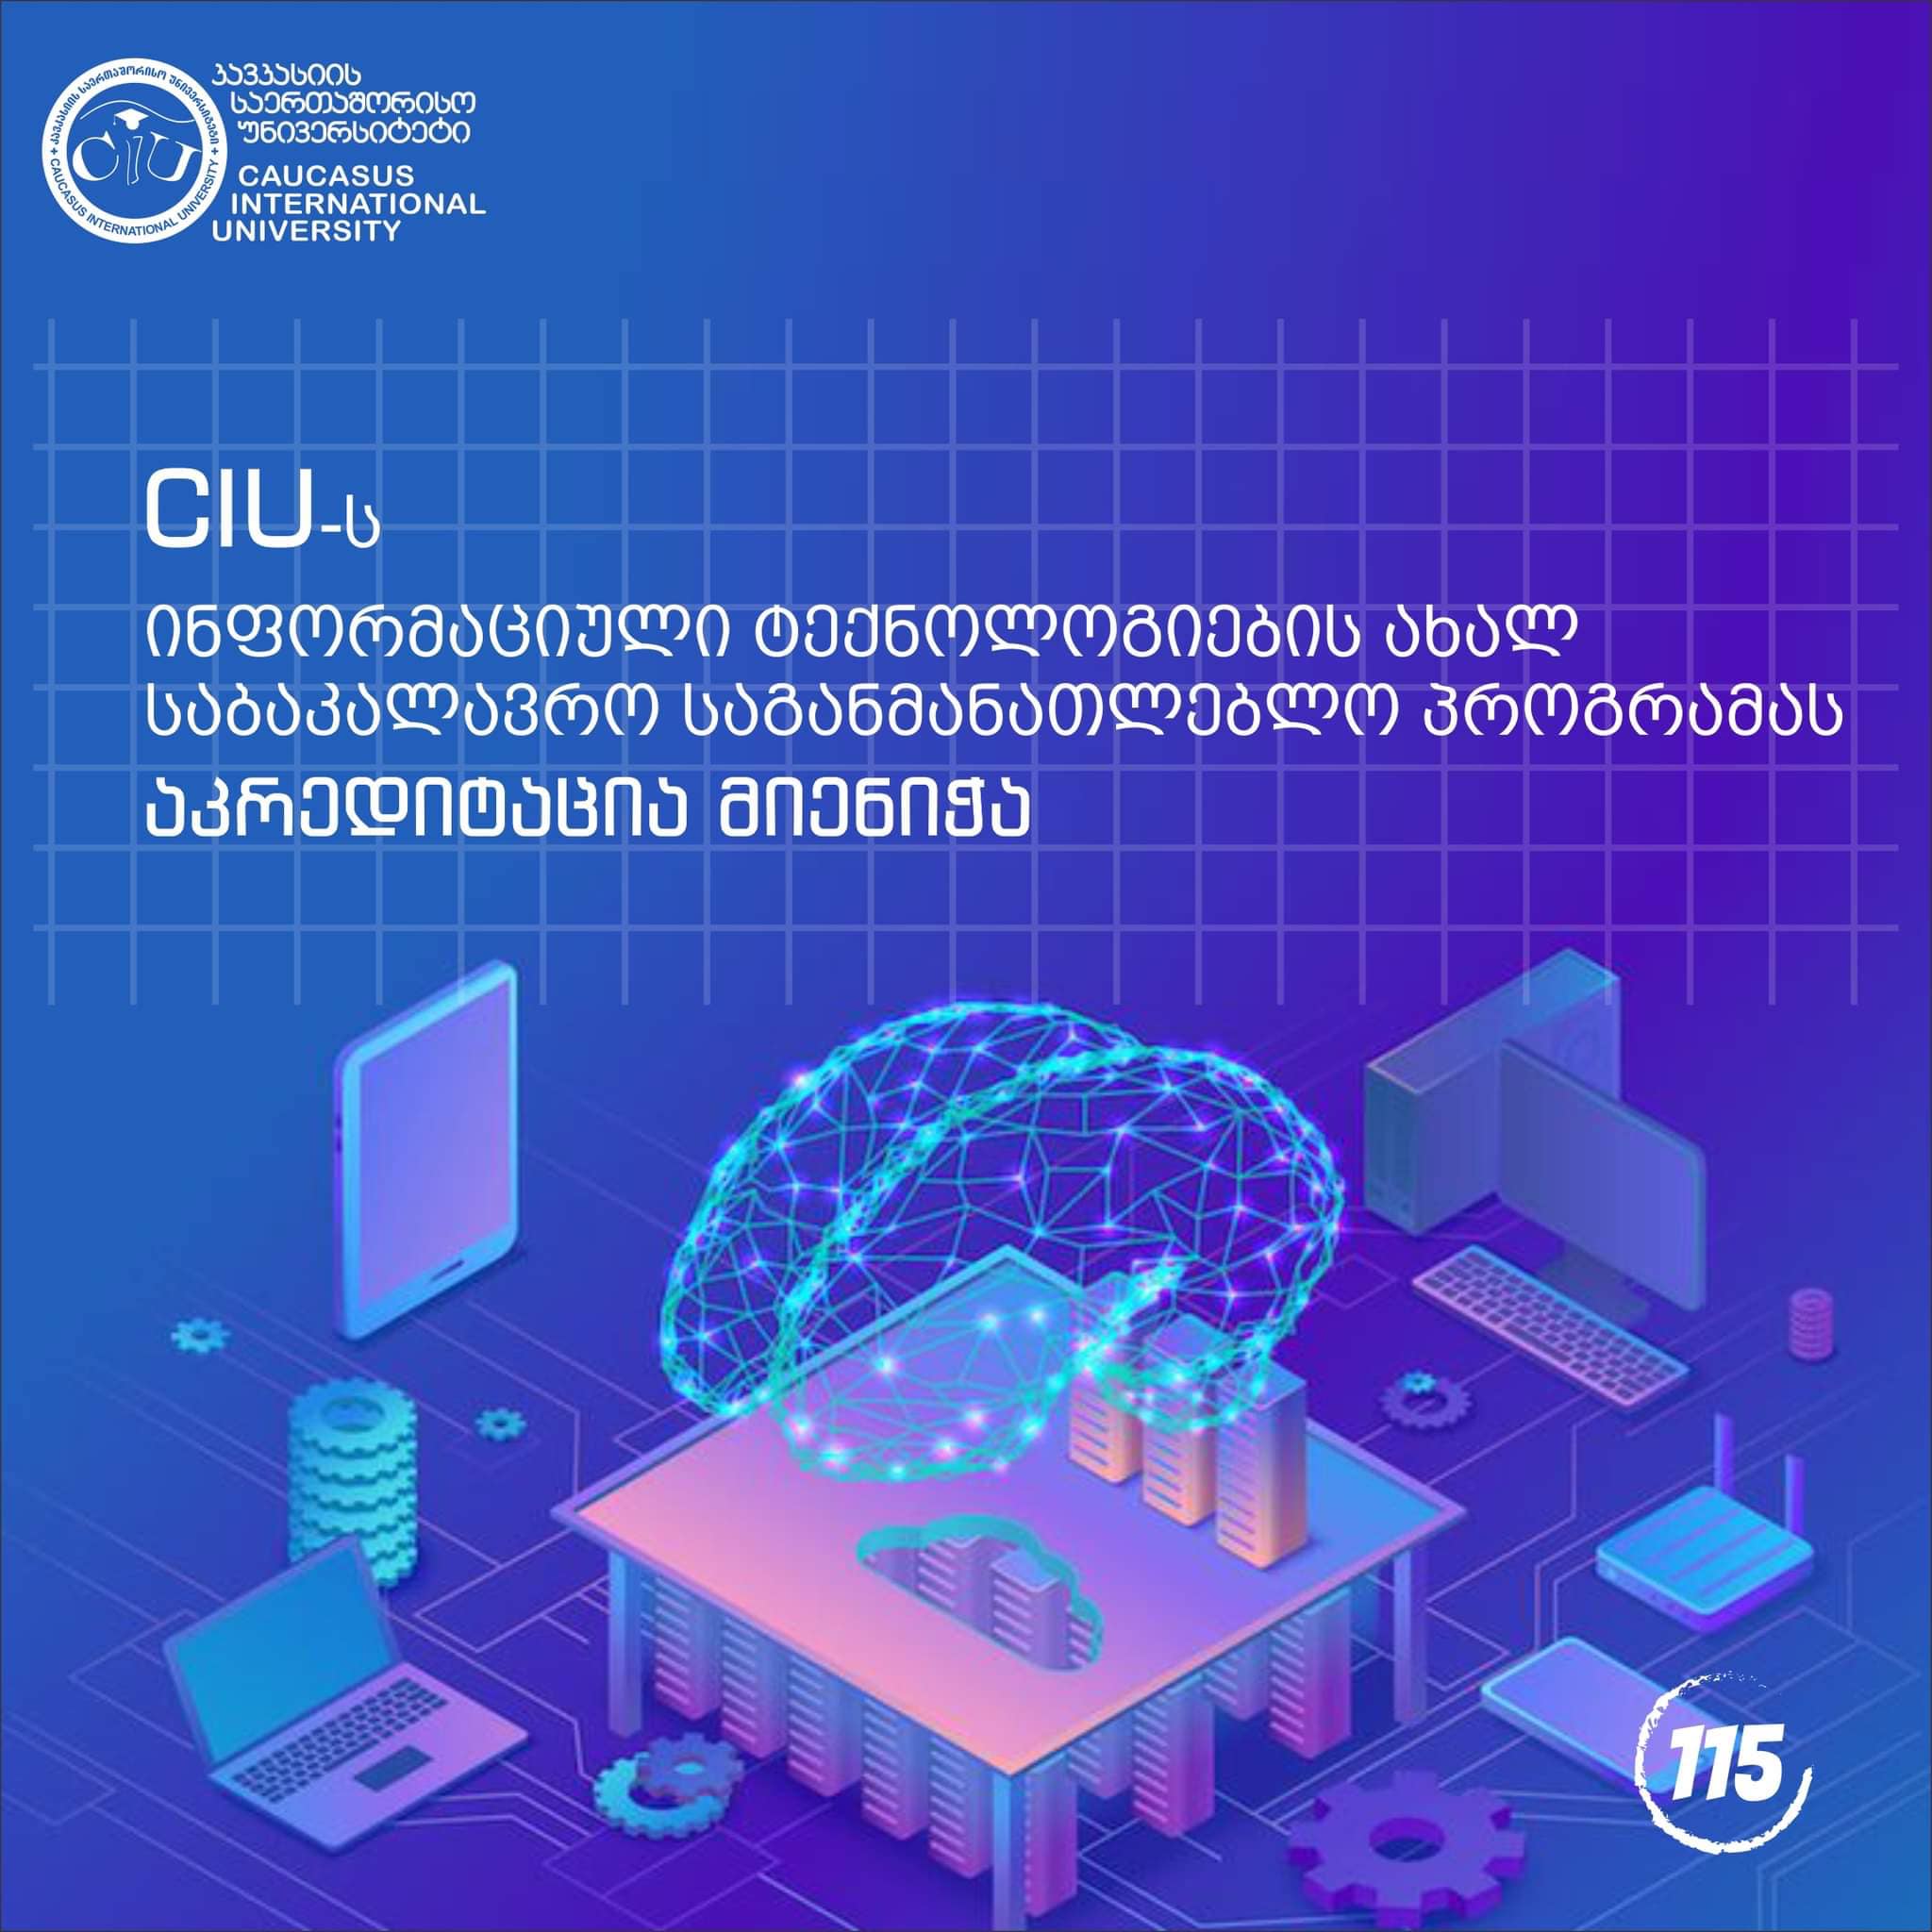 New Undergraduate Educational Program in Information Technologies Offered by CIU has been Granted Accreditation!